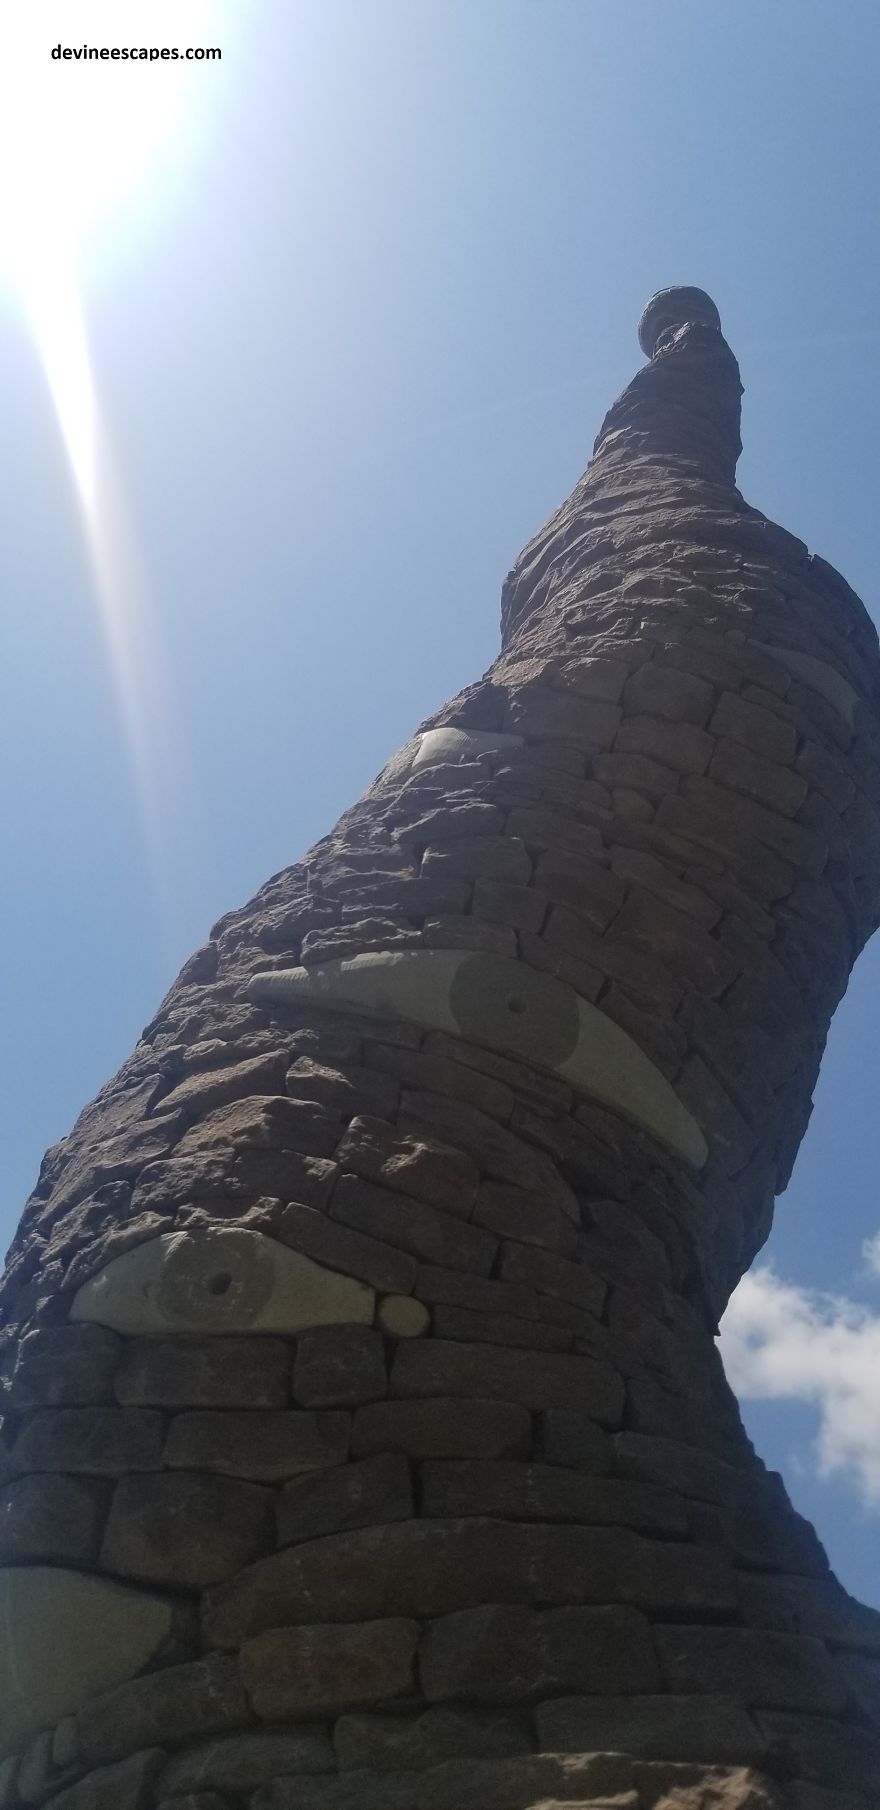 I Built A Seven Foot-Plus Tall Tentacle, With Eyes All Over, From Pieces Of Stone